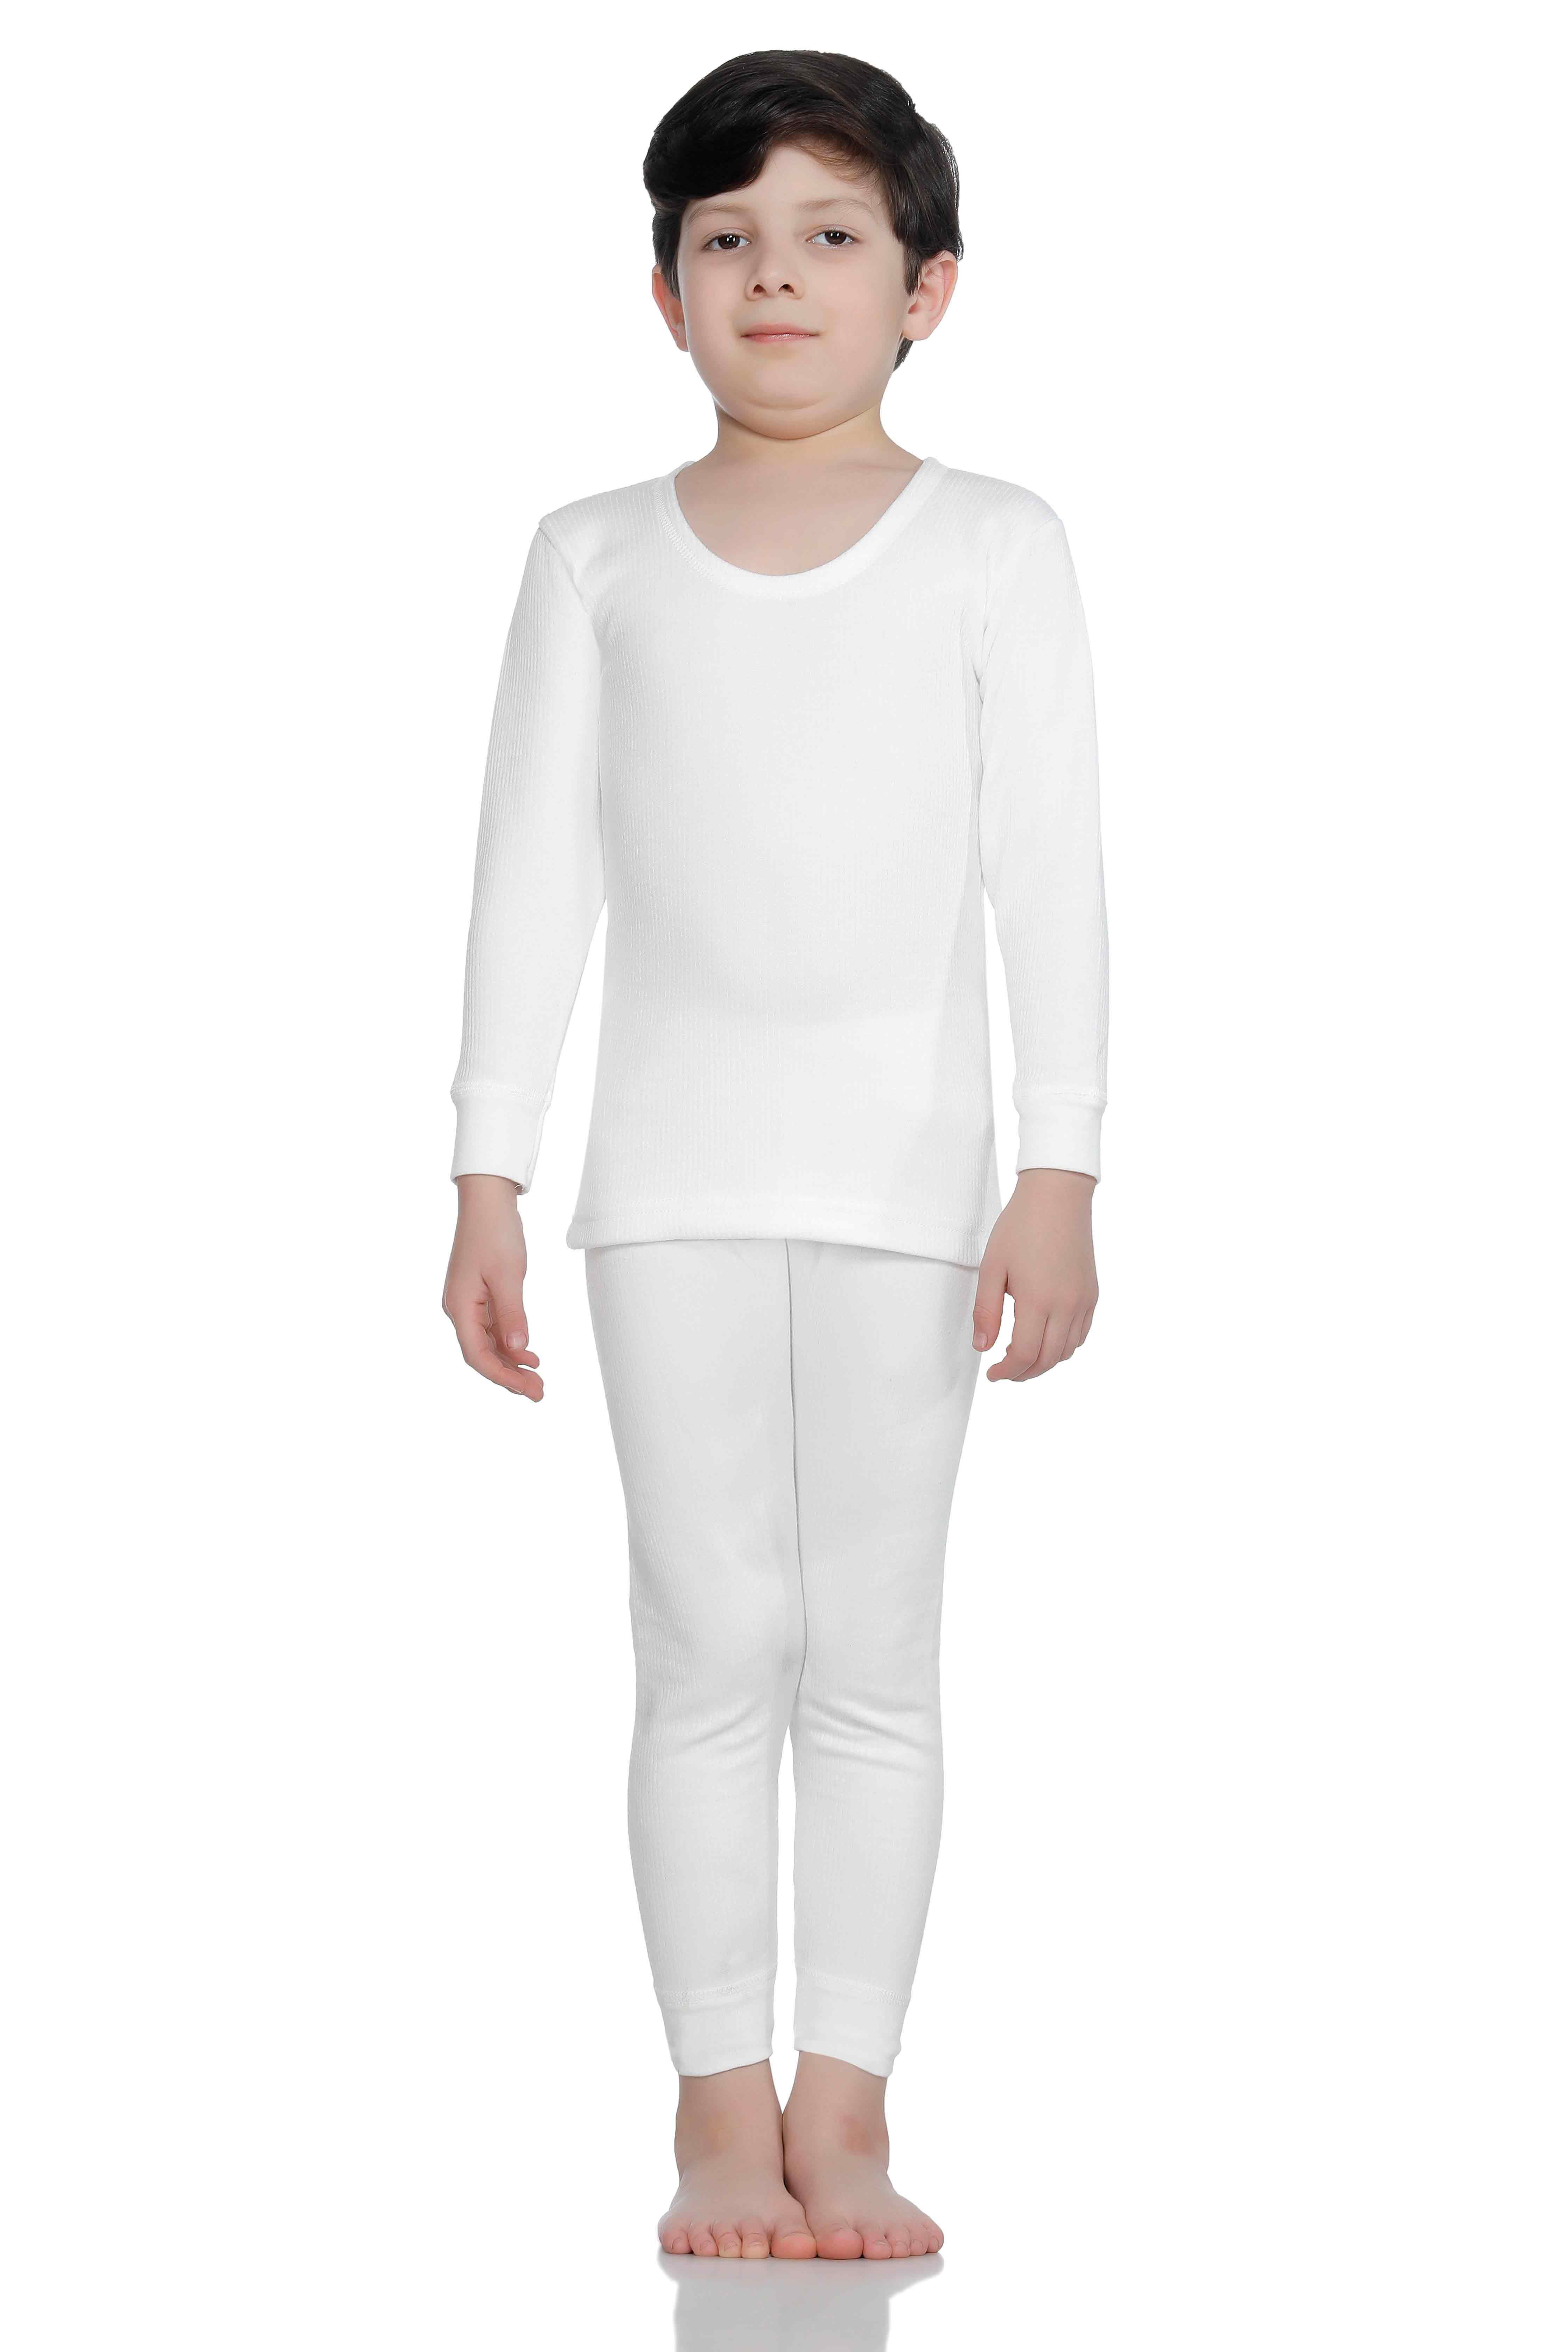     			Bodycare Insider Off White Solid Kids Thermal Top & Bottom Set